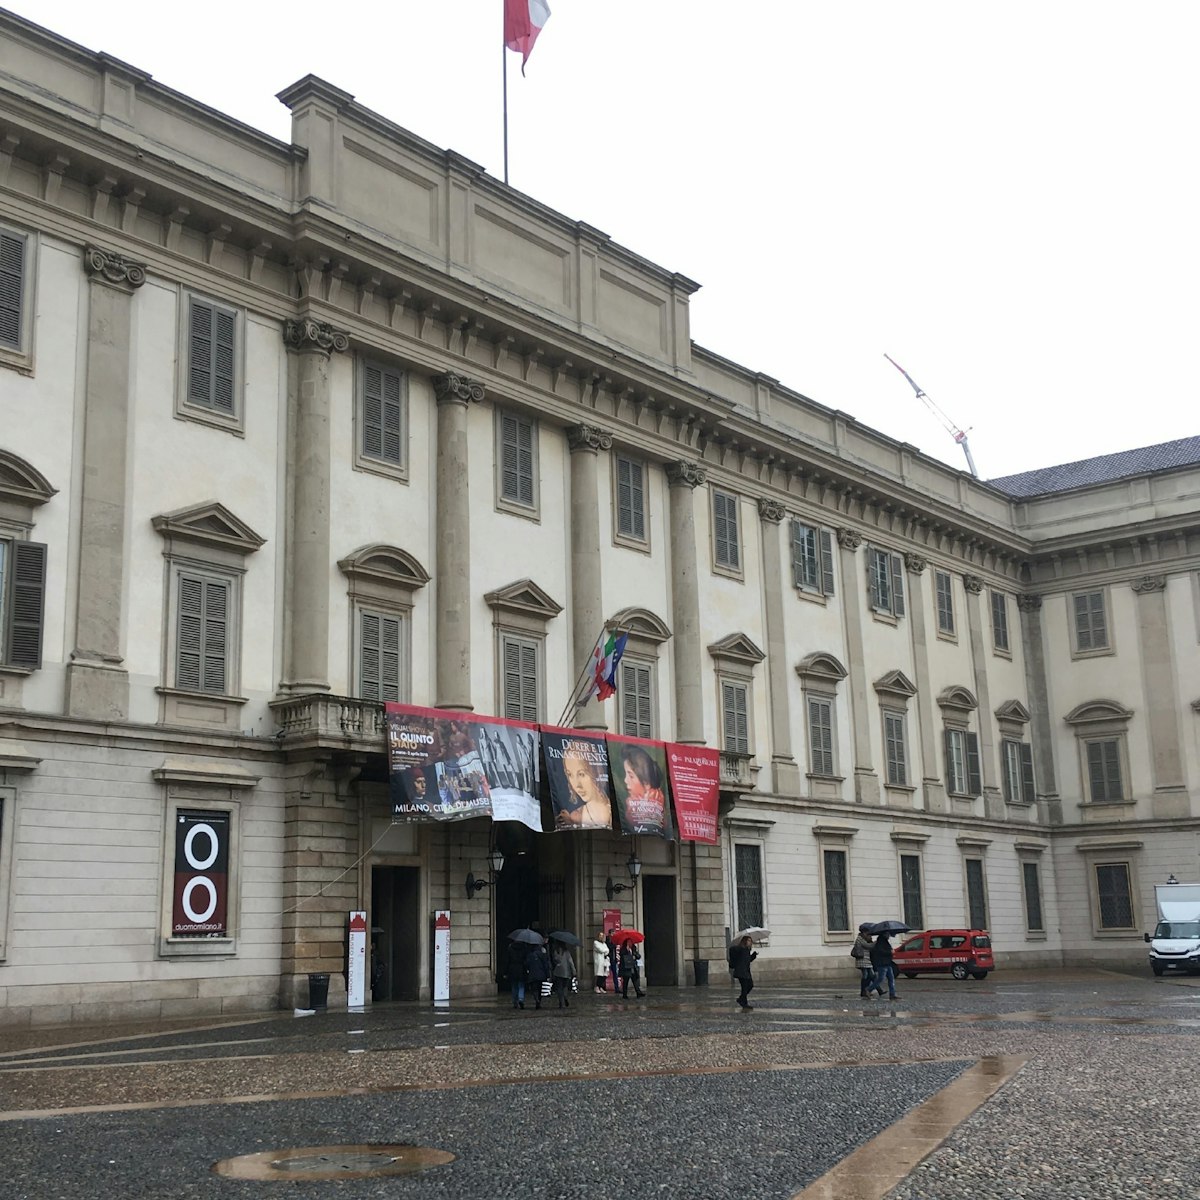 View of the Palazzo Reale